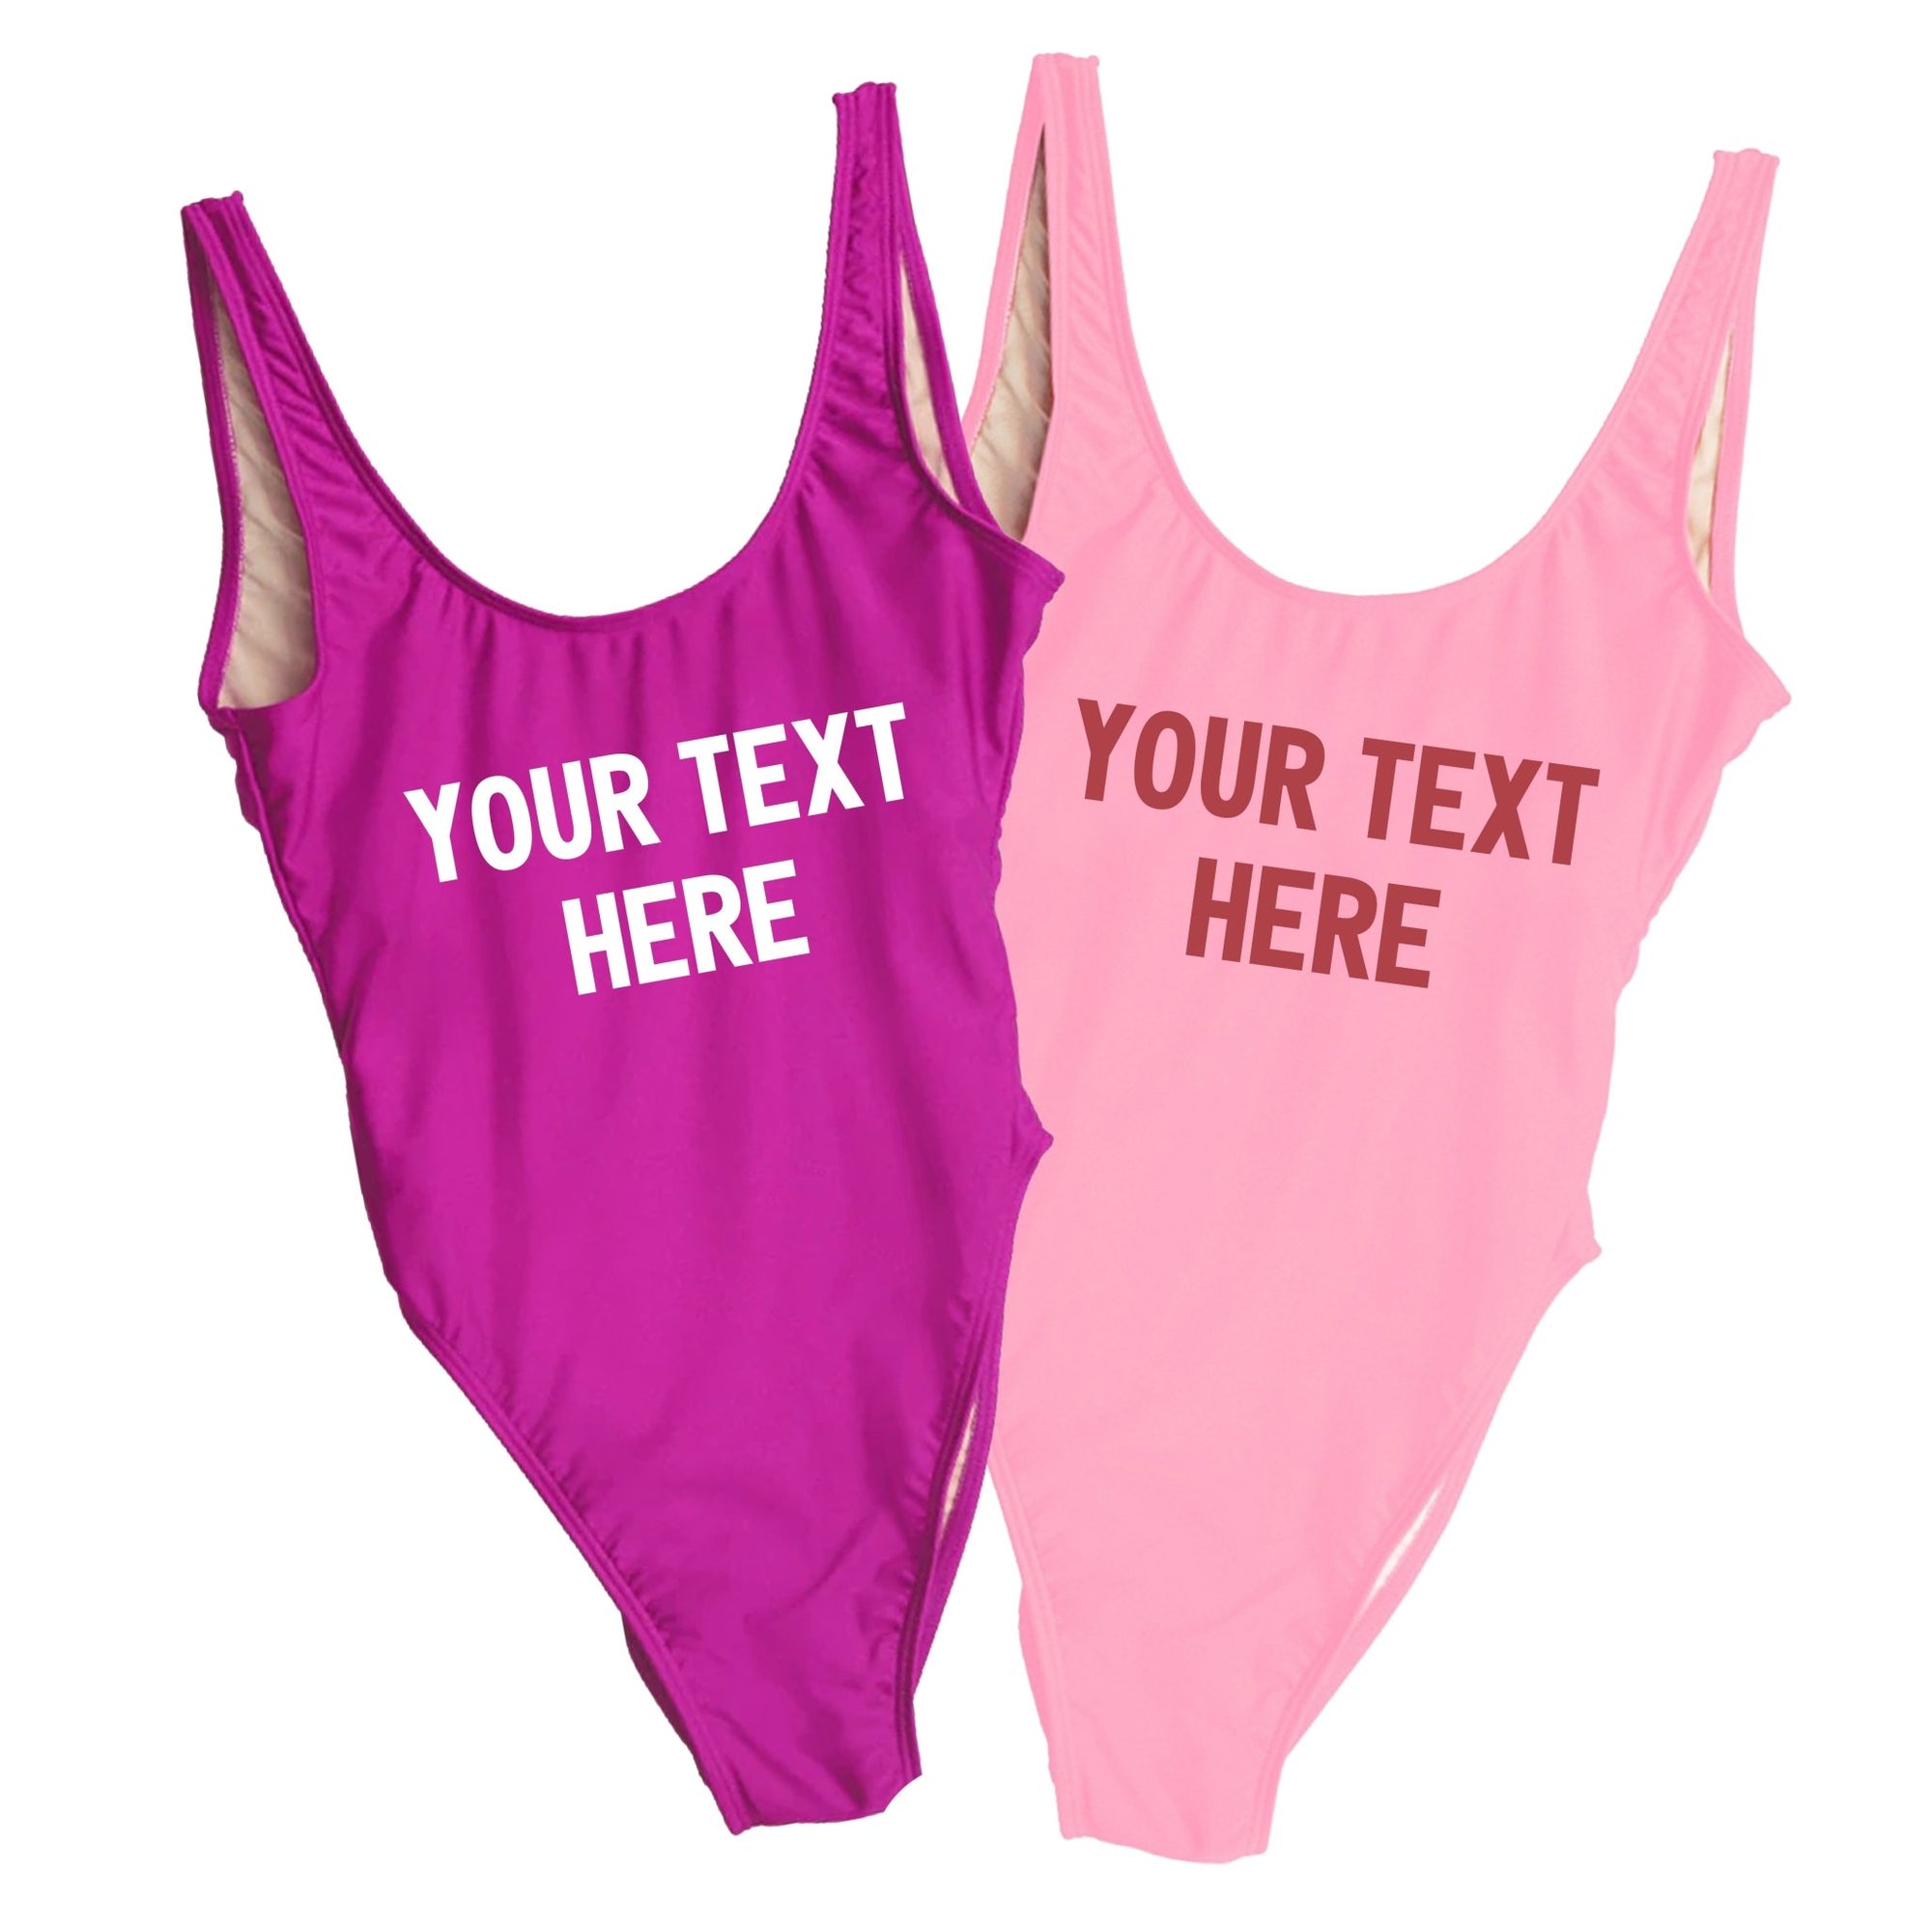 Customized Swimsuits for Women - Sprinkled With Pink